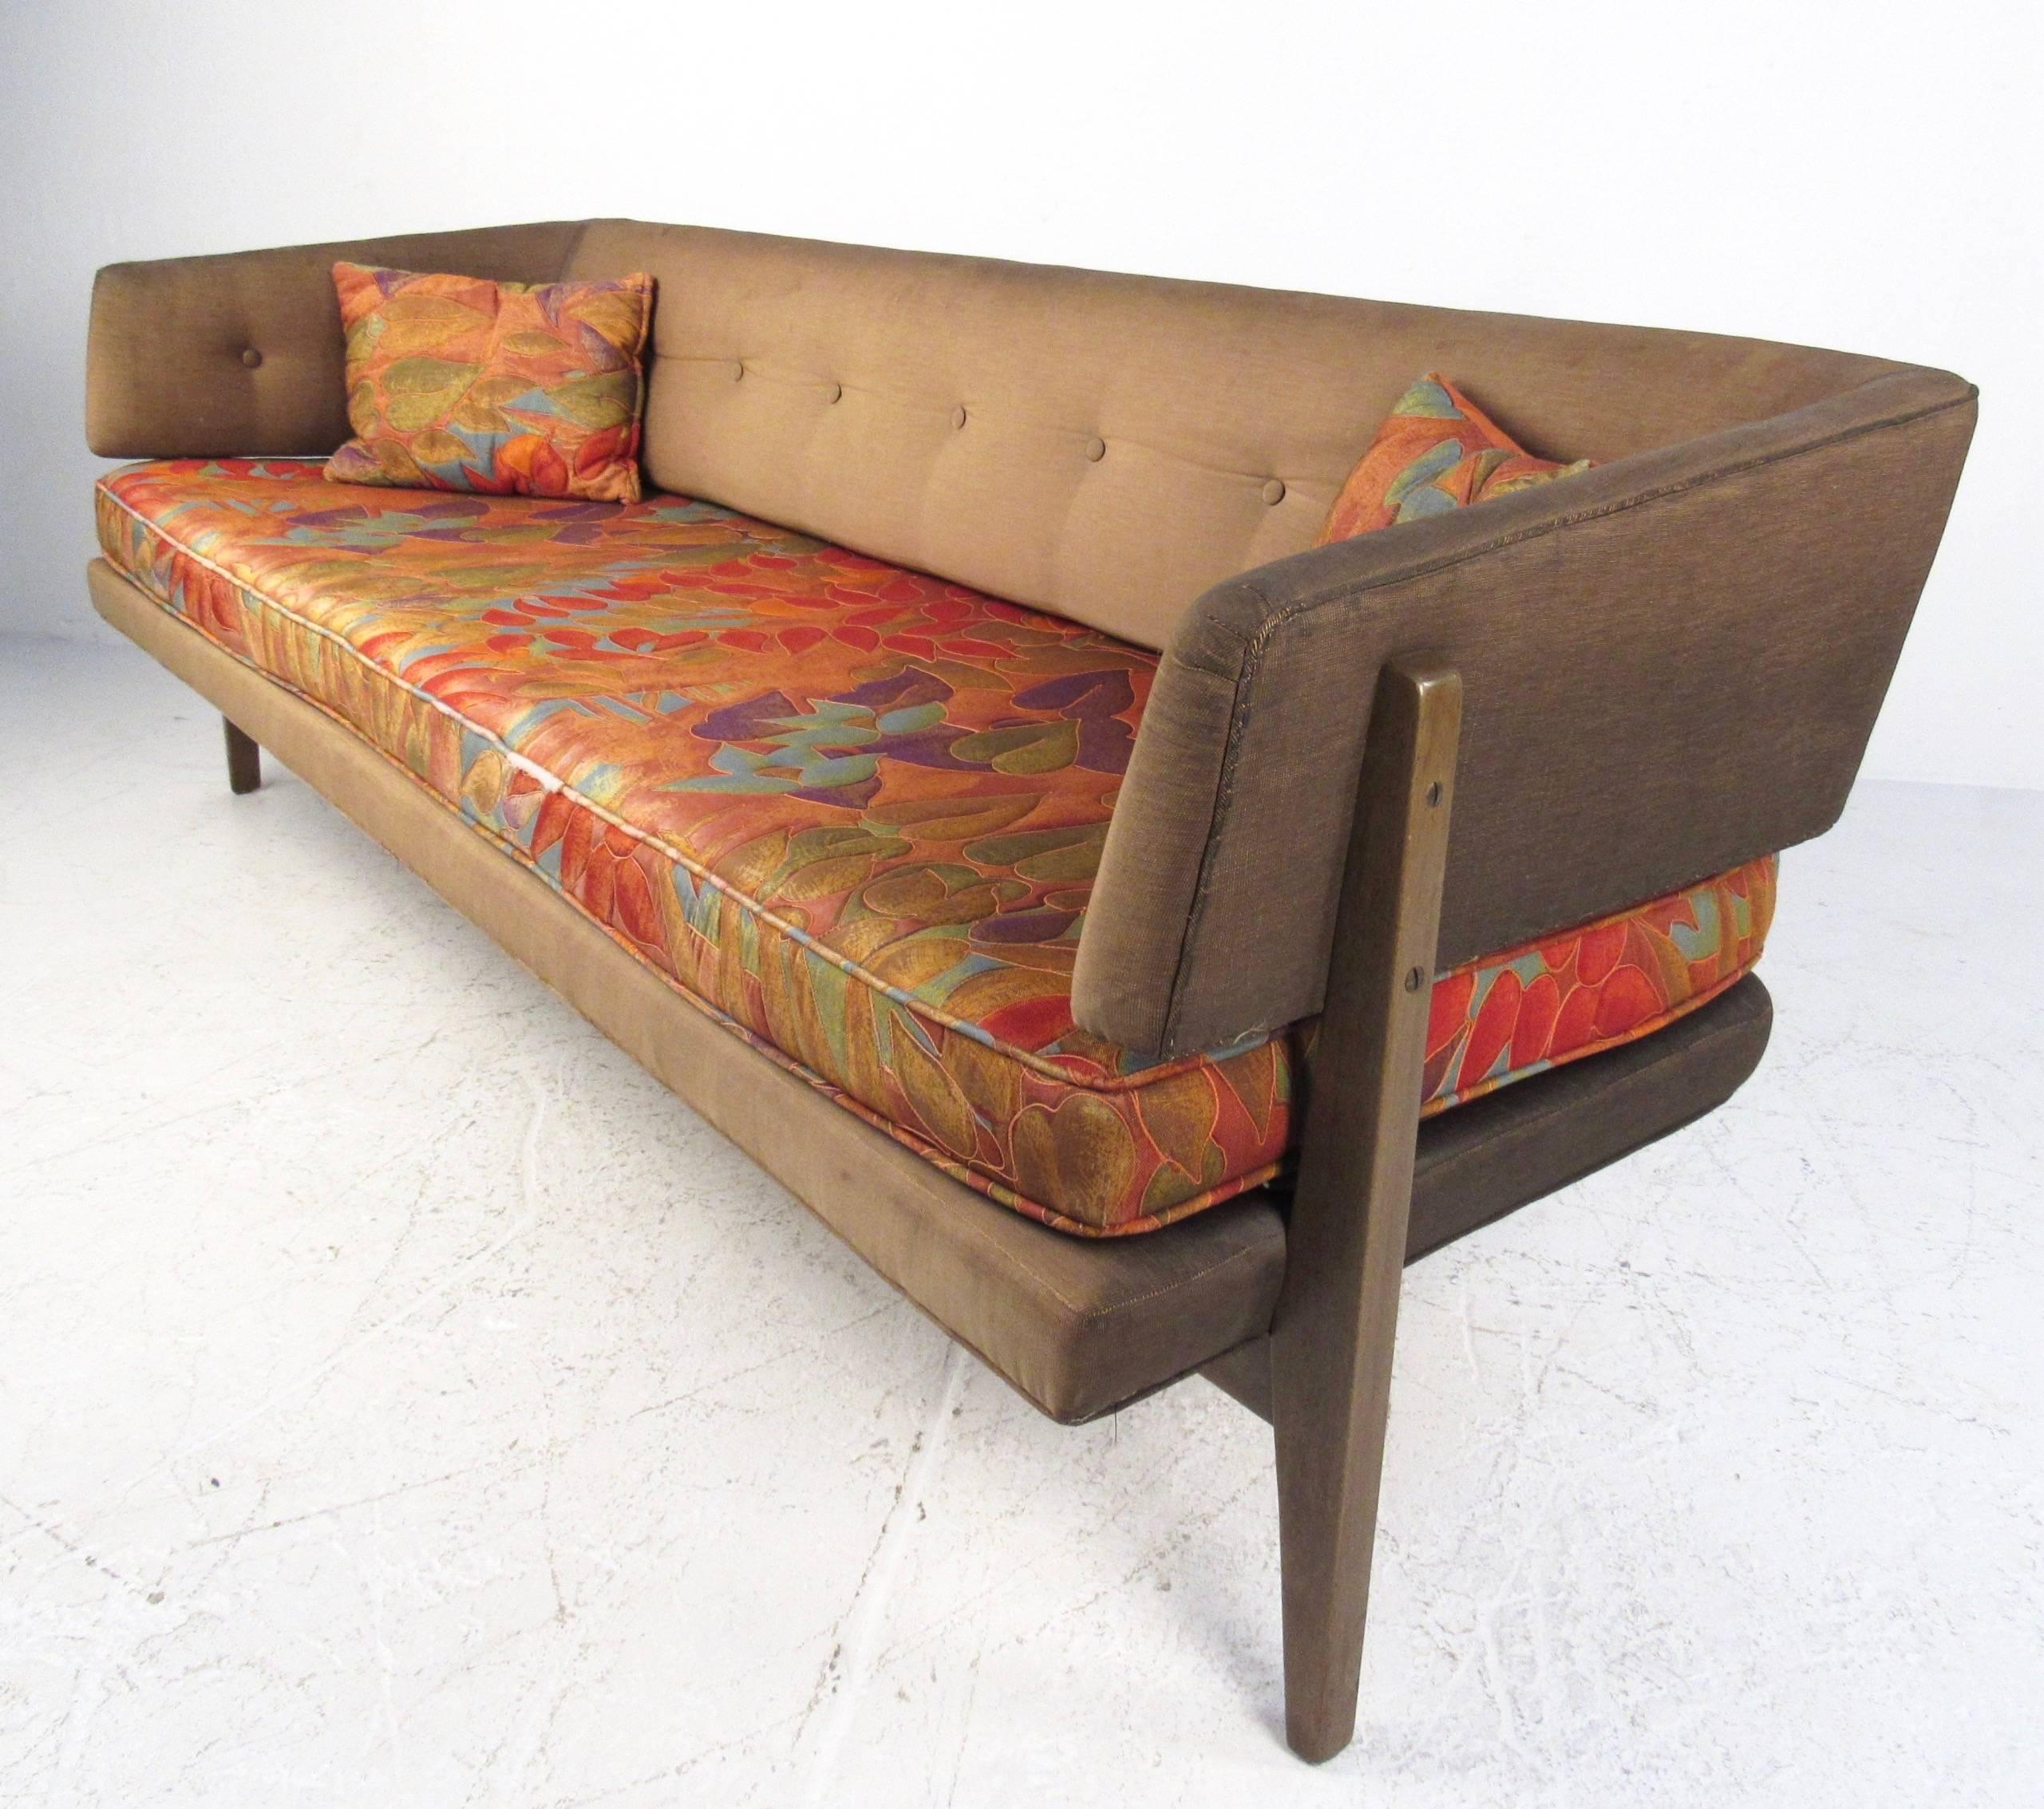 This stunning vintage sofa by Edward Wormley for Dunbar features a tufted sculptural seat back with unique tapered walnut legs. Uniquely covered vintage throw pillows match the two tone upholstery of the sofa, whose modern lines and comfortable